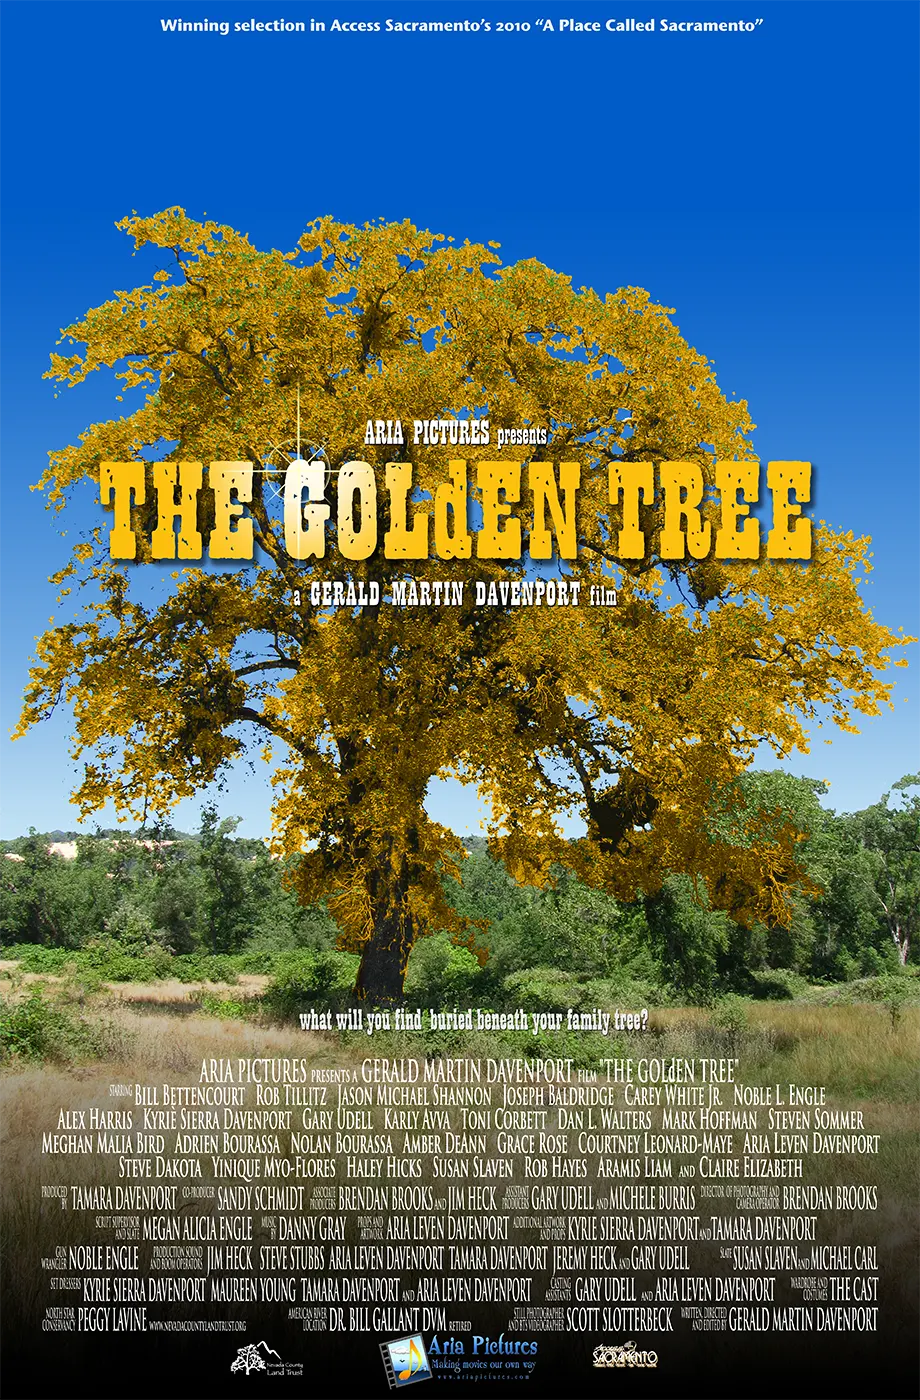 Official movie poster for THE GOLdEN TREE (2010).